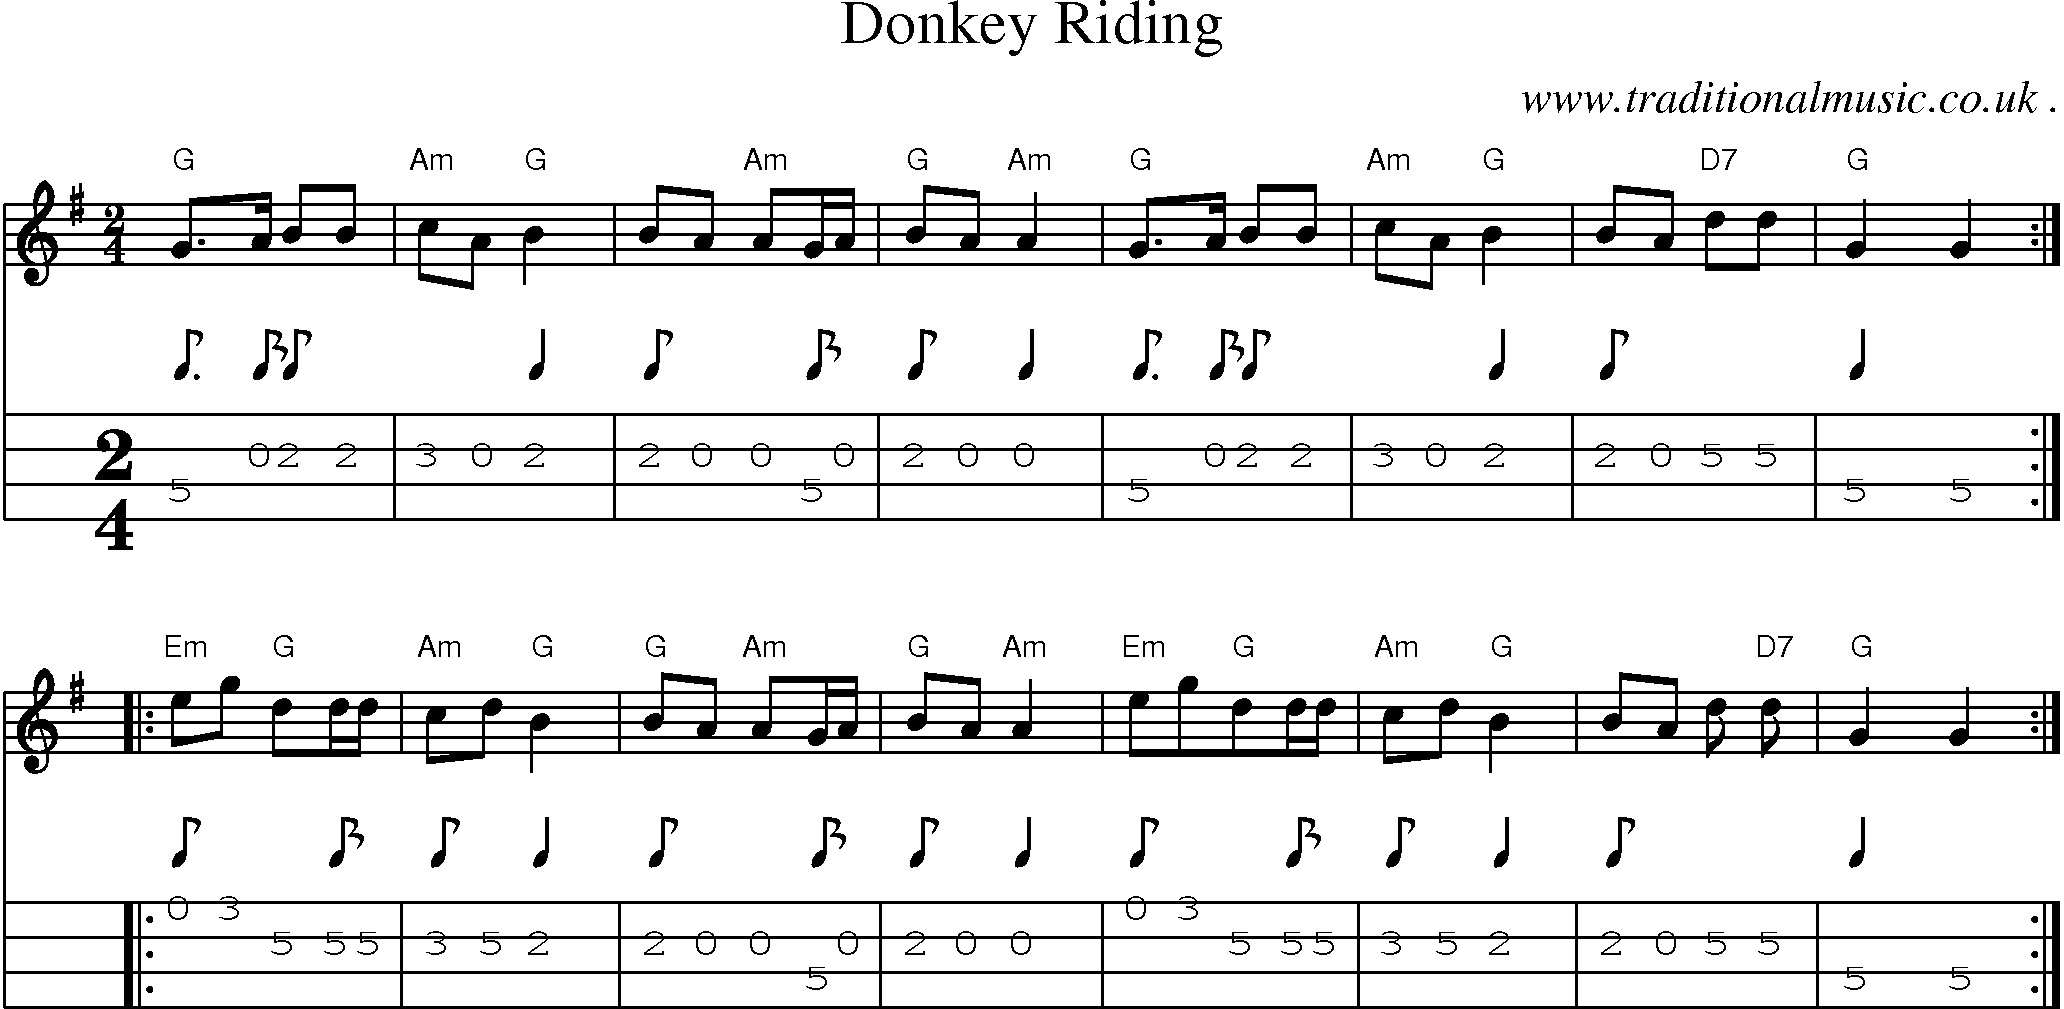 Music Score and Guitar Tabs for Donkey Riding